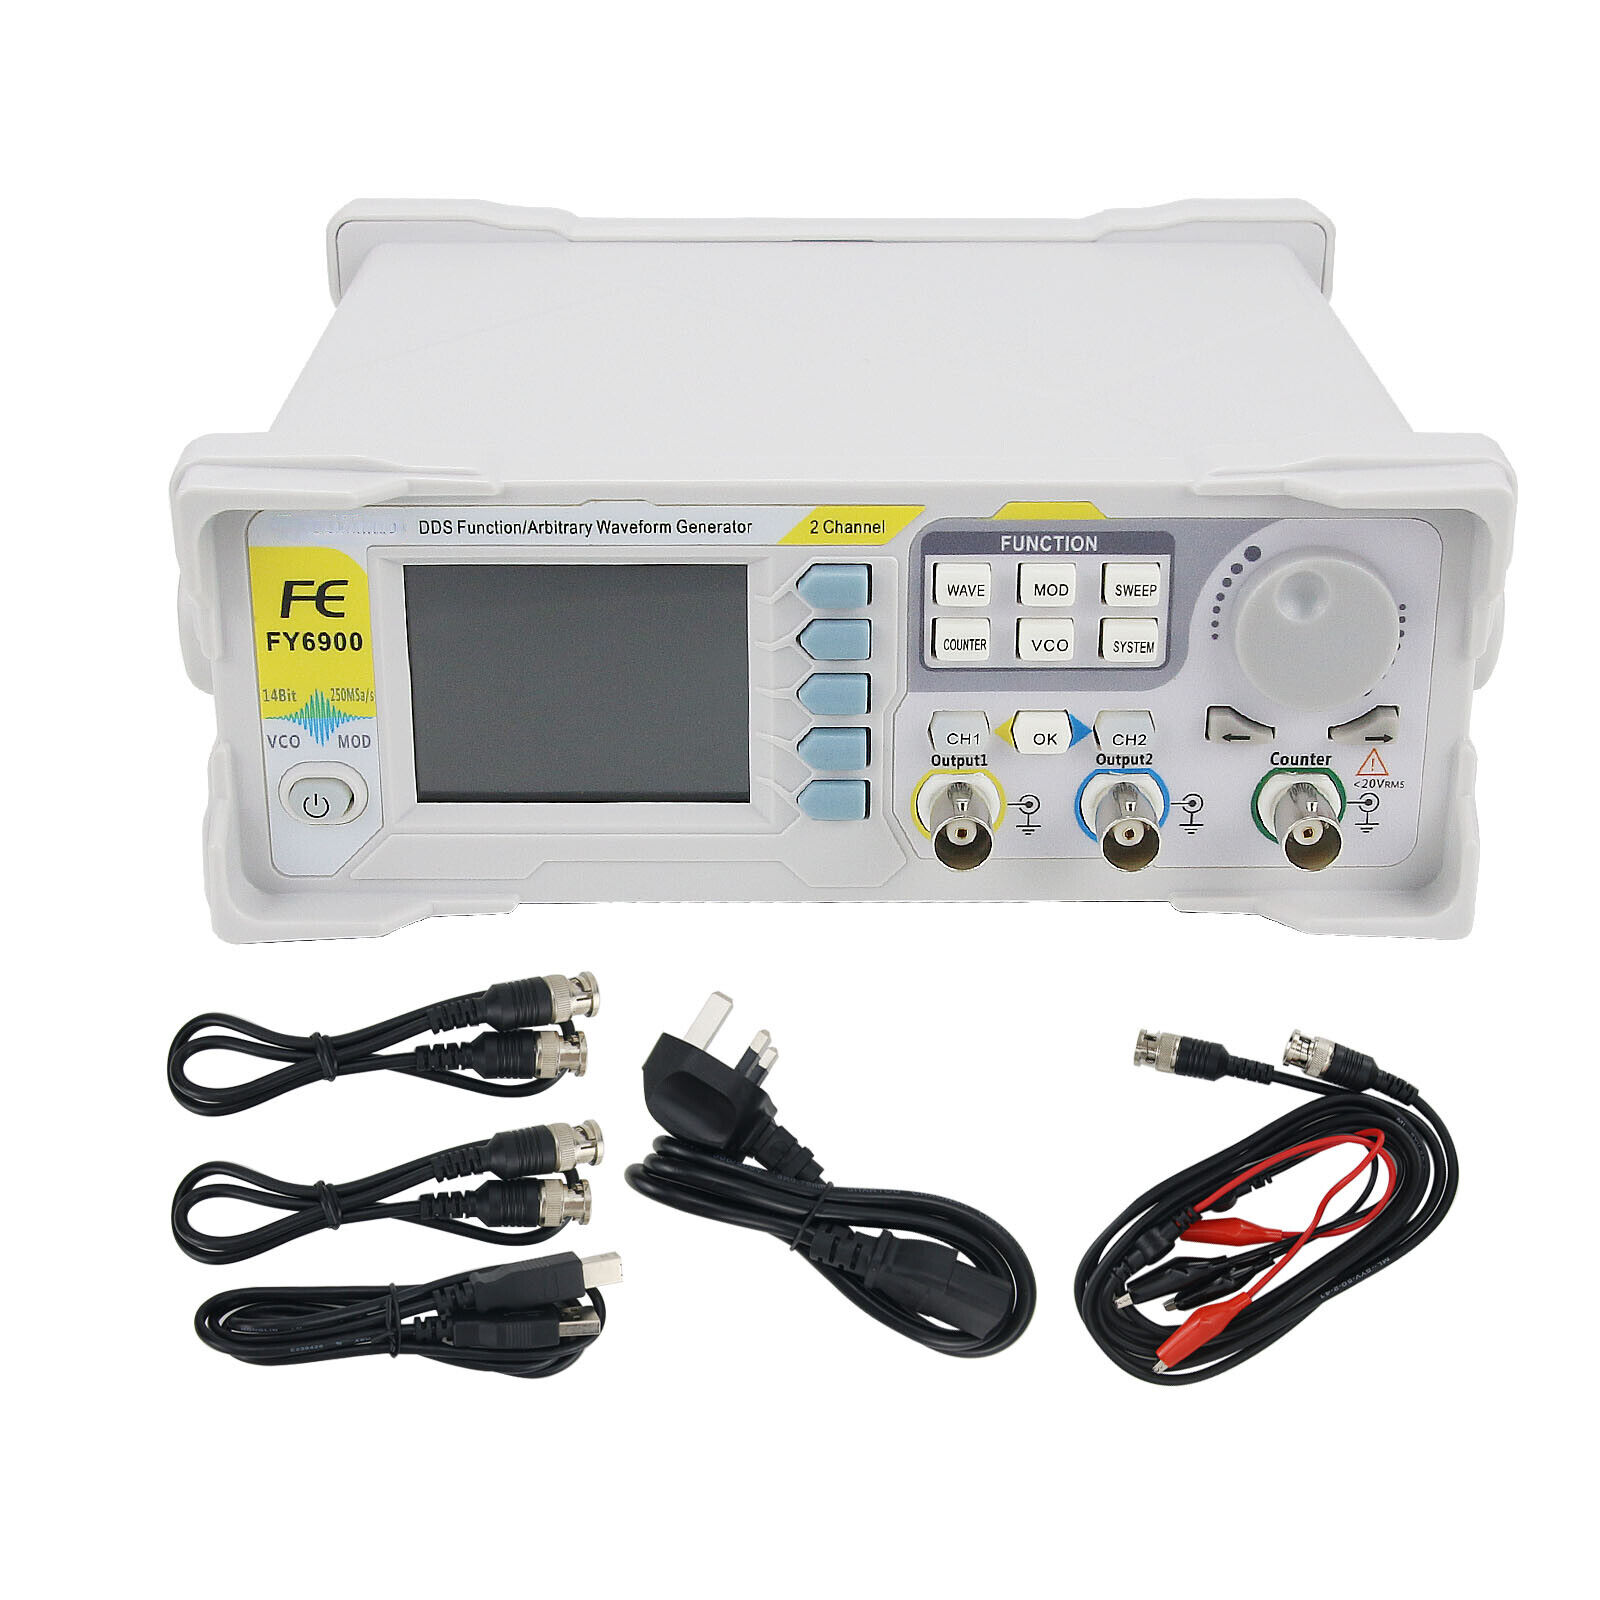 FY6900-100M 100MHz Waveform Signal Generator for DDS 2-Channel Frequency Counter